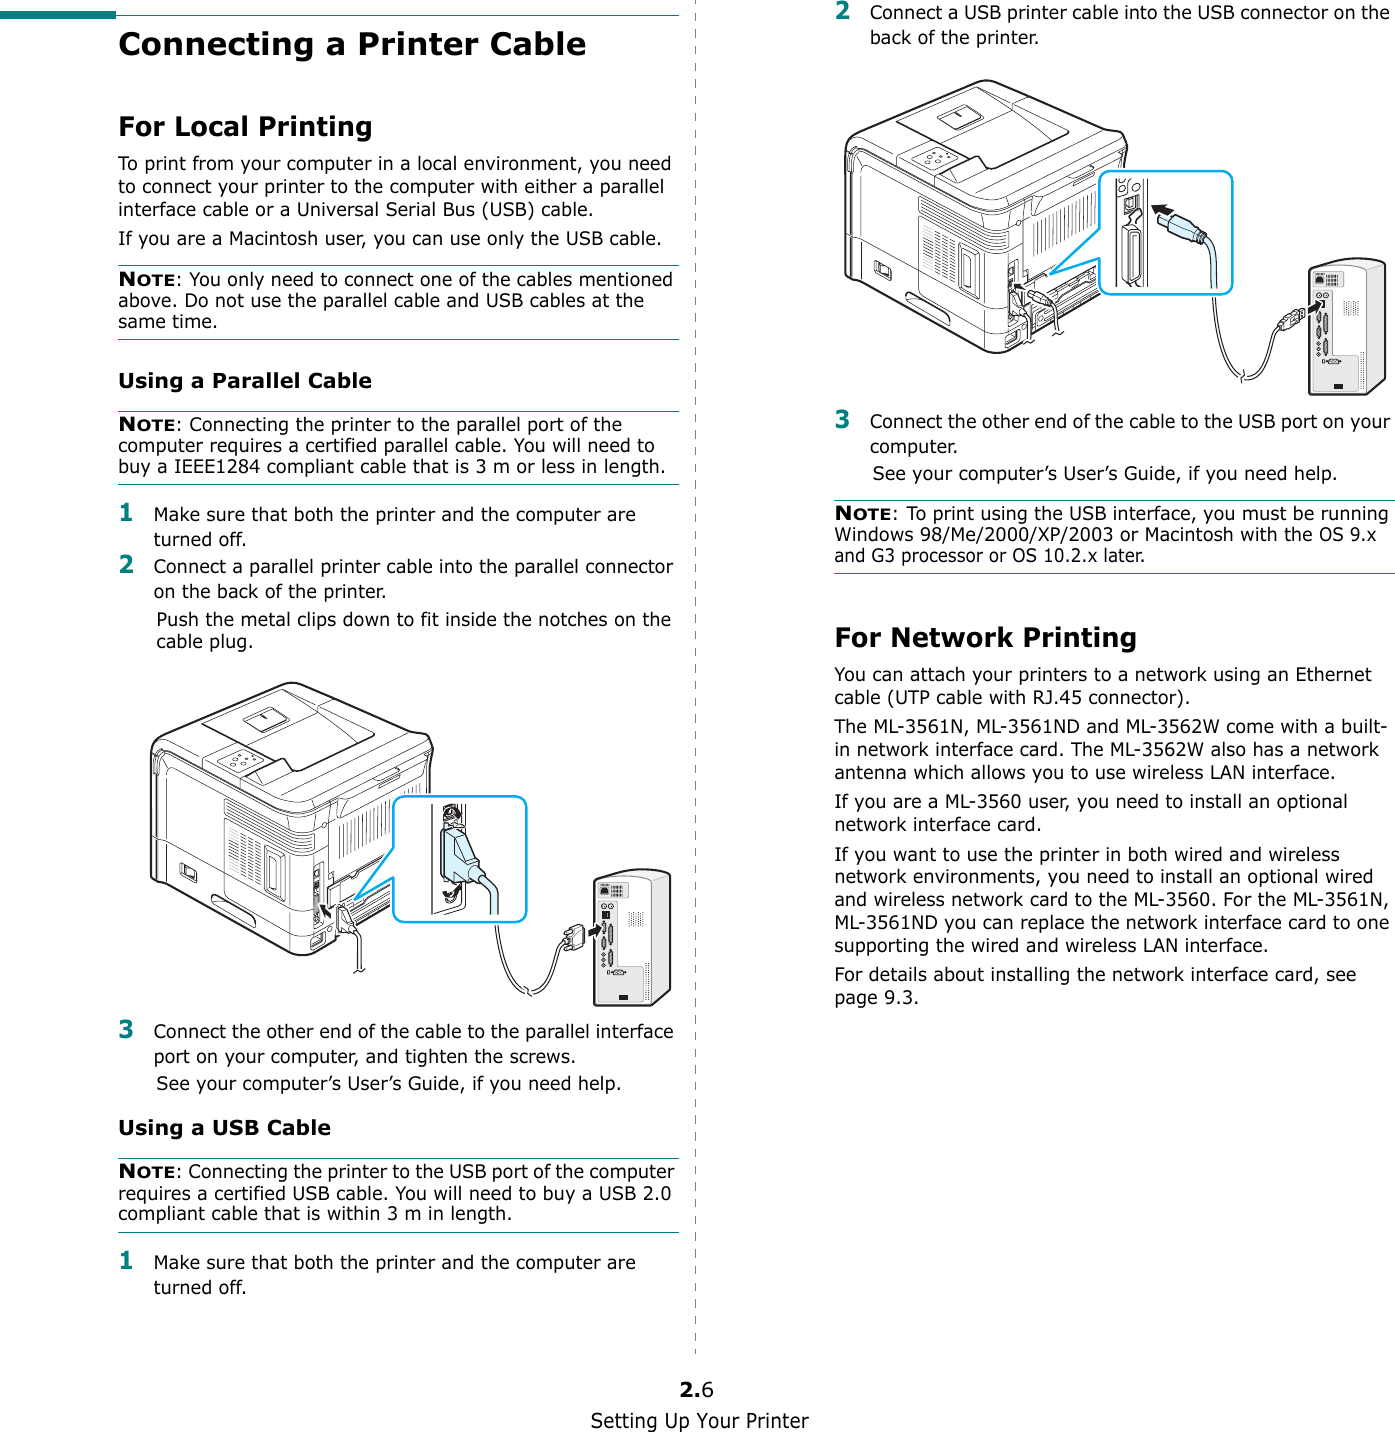 Setting Up Your Printer2.6Connecting a Printer CableFor Local PrintingTo print from your computer in a local environment, you need to connect your printer to the computer with either a parallel interface cable or a Universal Serial Bus (USB) cable. If you are a Macintosh user, you can use only the USB cable.NOTE: You only need to connect one of the cables mentioned above. Do not use the parallel cable and USB cables at the same time.Using a Parallel CableNOTE: Connecting the printer to the parallel port of the computer requires a certified parallel cable. You will need to buy a IEEE1284 compliant cable that is 3 m or less in length.1Make sure that both the printer and the computer are turned off.2Connect a parallel printer cable into the parallel connector on the back of the printer. Push the metal clips down to fit inside the notches on the cable plug.3Connect the other end of the cable to the parallel interface port on your computer, and tighten the screws. See your computer’s User’s Guide, if you need help.Using a USB CableNOTE: Connecting the printer to the USB port of the computer requires a certified USB cable. You will need to buy a USB 2.0 compliant cable that is within 3 m in length. 1Make sure that both the printer and the computer are turned off.2Connect a USB printer cable into the USB connector on the back of the printer. 3Connect the other end of the cable to the USB port on your computer. See your computer’s User’s Guide, if you need help.NOTE: To print using the USB interface, you must be running Windows 98/Me/2000/XP/2003 or Macintosh with the OS 9.x and G3 processor or OS 10.2.x later. For Network PrintingYou can attach your printers to a network using an Ethernet cable (UTP cable with RJ.45 connector). The ML-3561N, ML-3561ND and ML-3562W come with a built-in network interface card. The ML-3562W also has a network antenna which allows you to use wireless LAN interface.If you are a ML-3560 user, you need to install an optional network interface card.If you want to use the printer in both wired and wireless network environments, you need to install an optional wired and wireless network card to the ML-3560. For the ML-3561N, ML-3561ND you can replace the network interface card to one supporting the wired and wireless LAN interface.For details about installing the network interface card, see page 9.3.